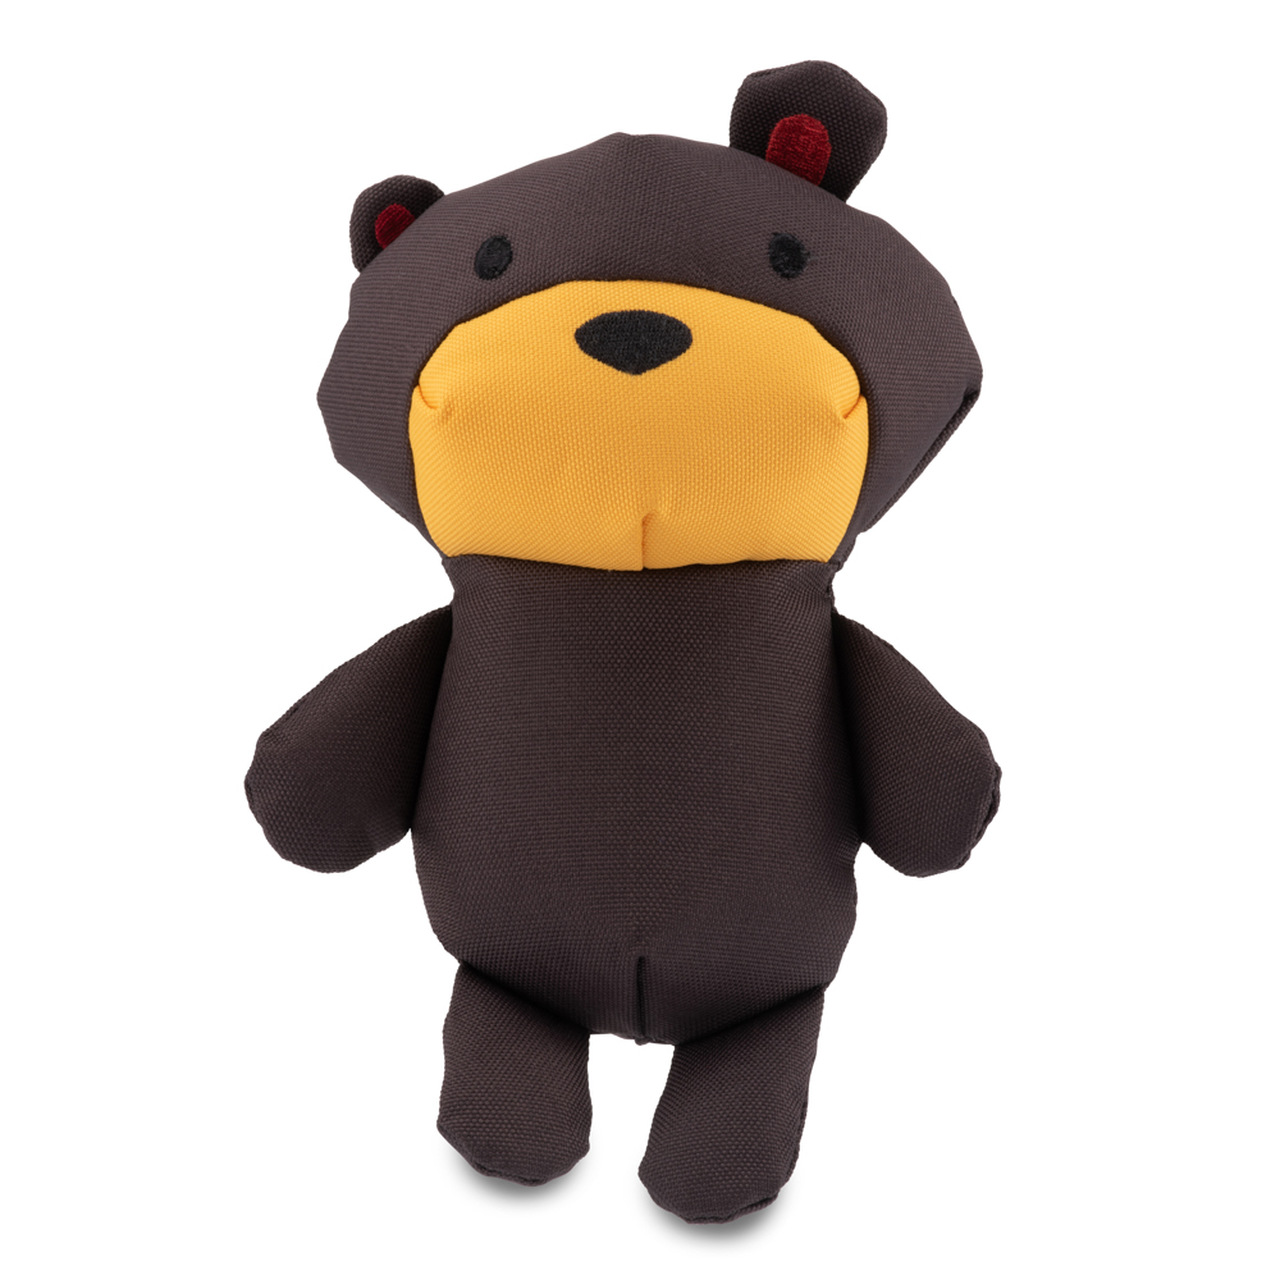 Beco Recycled & Soft Stofftier Teddy "Toby"